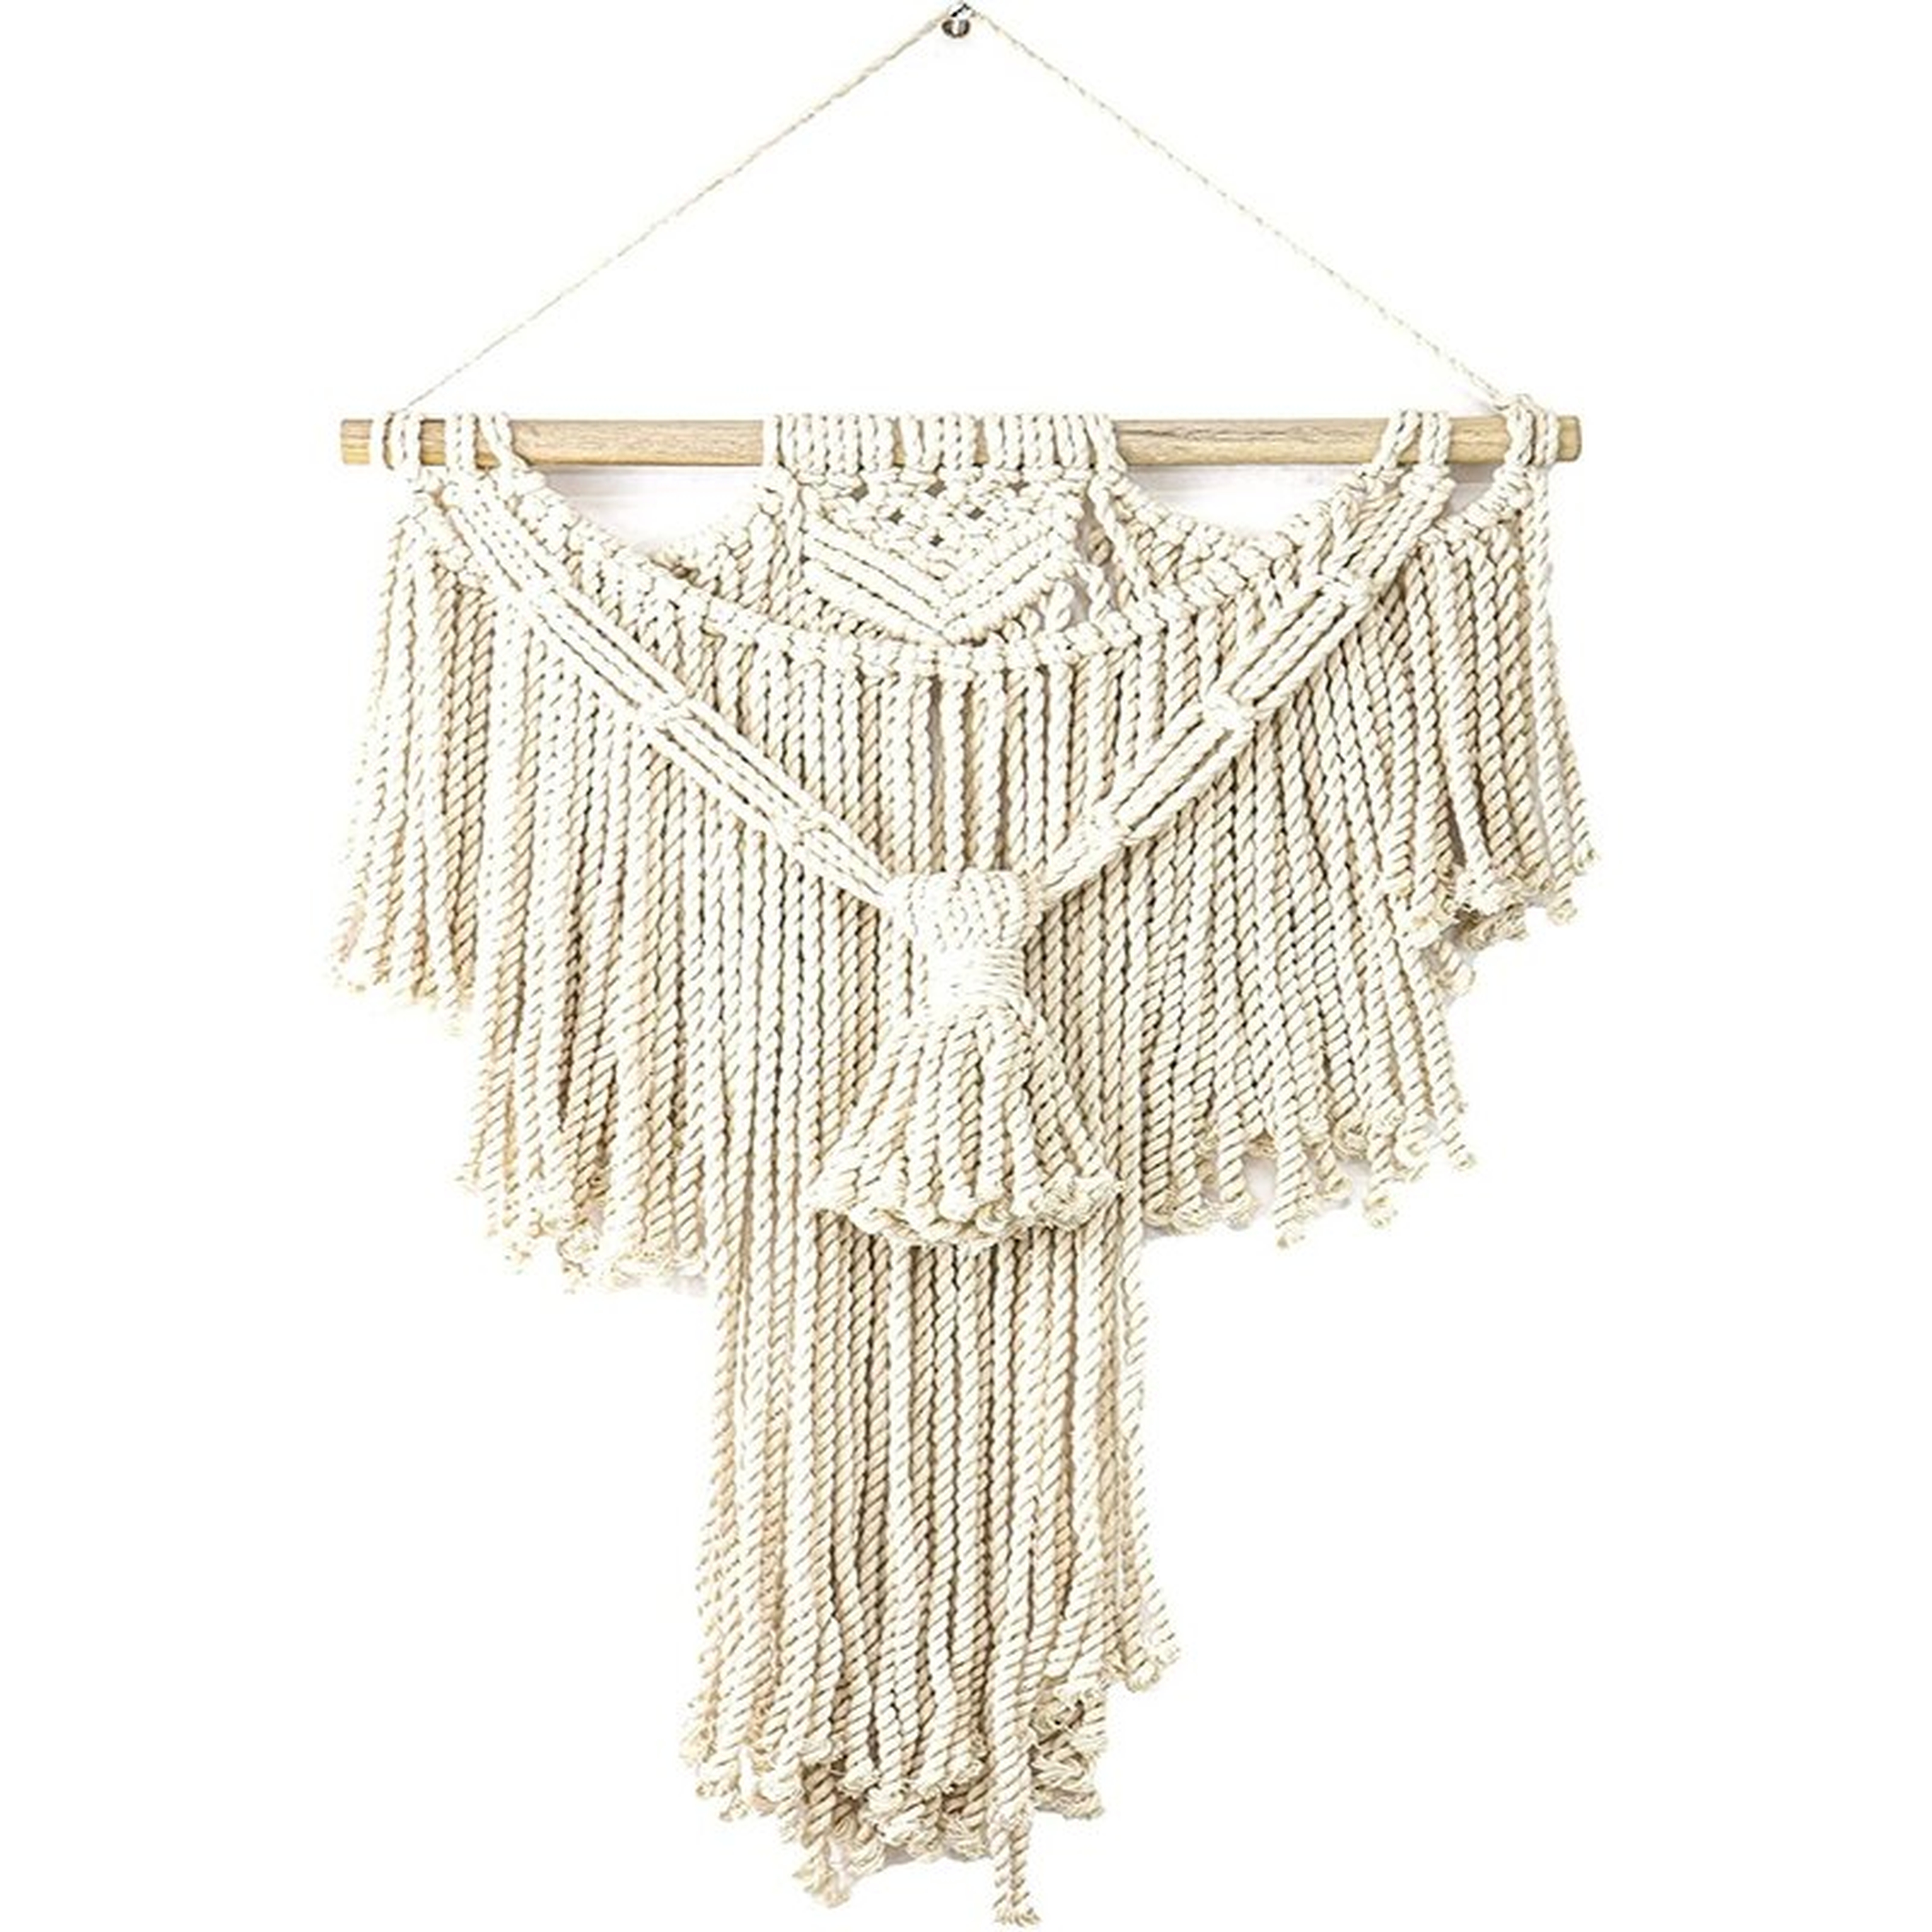 Cotton Macrame Wall Hanging with Rod Included - Wayfair